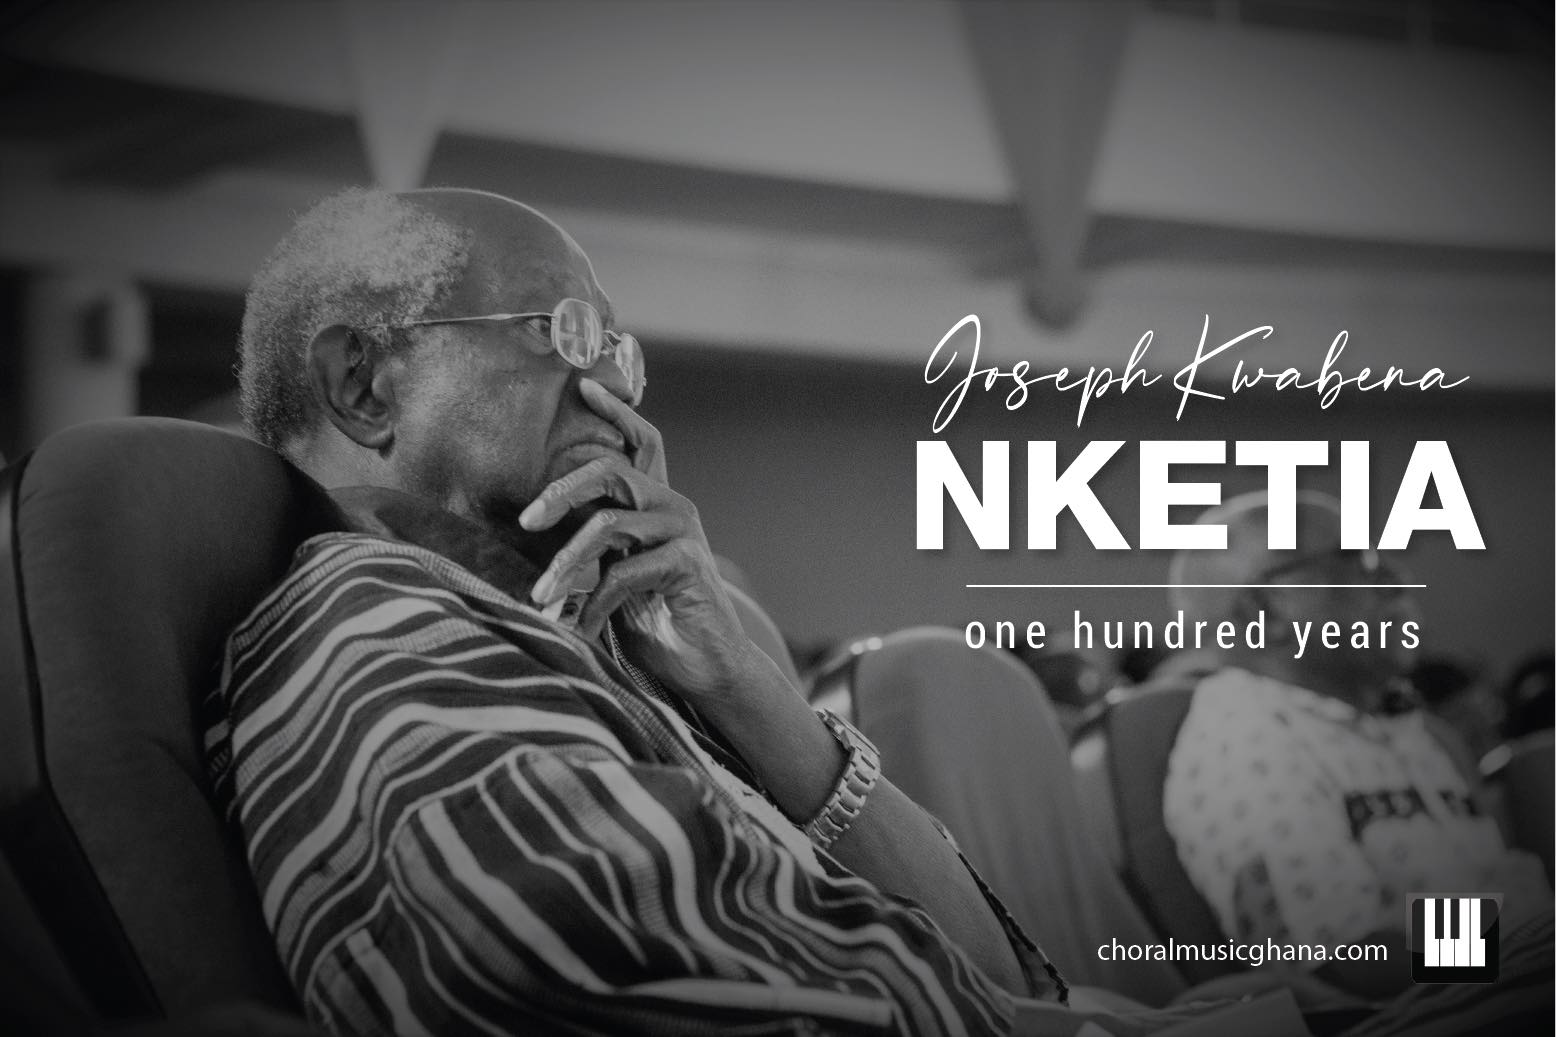 Centenary Editorial: In Conversation with Nketia In 2017, Jesse Johnson caught up with Joseph Hanson Kwabena Nketia, retired academic and composer, to discuss a broad range of concerns in art music theory, practice and culture in Ghana. On the 100th anniversary of his birth, we go back to this conversation to relive some of the nuggests of wisdom he shared.